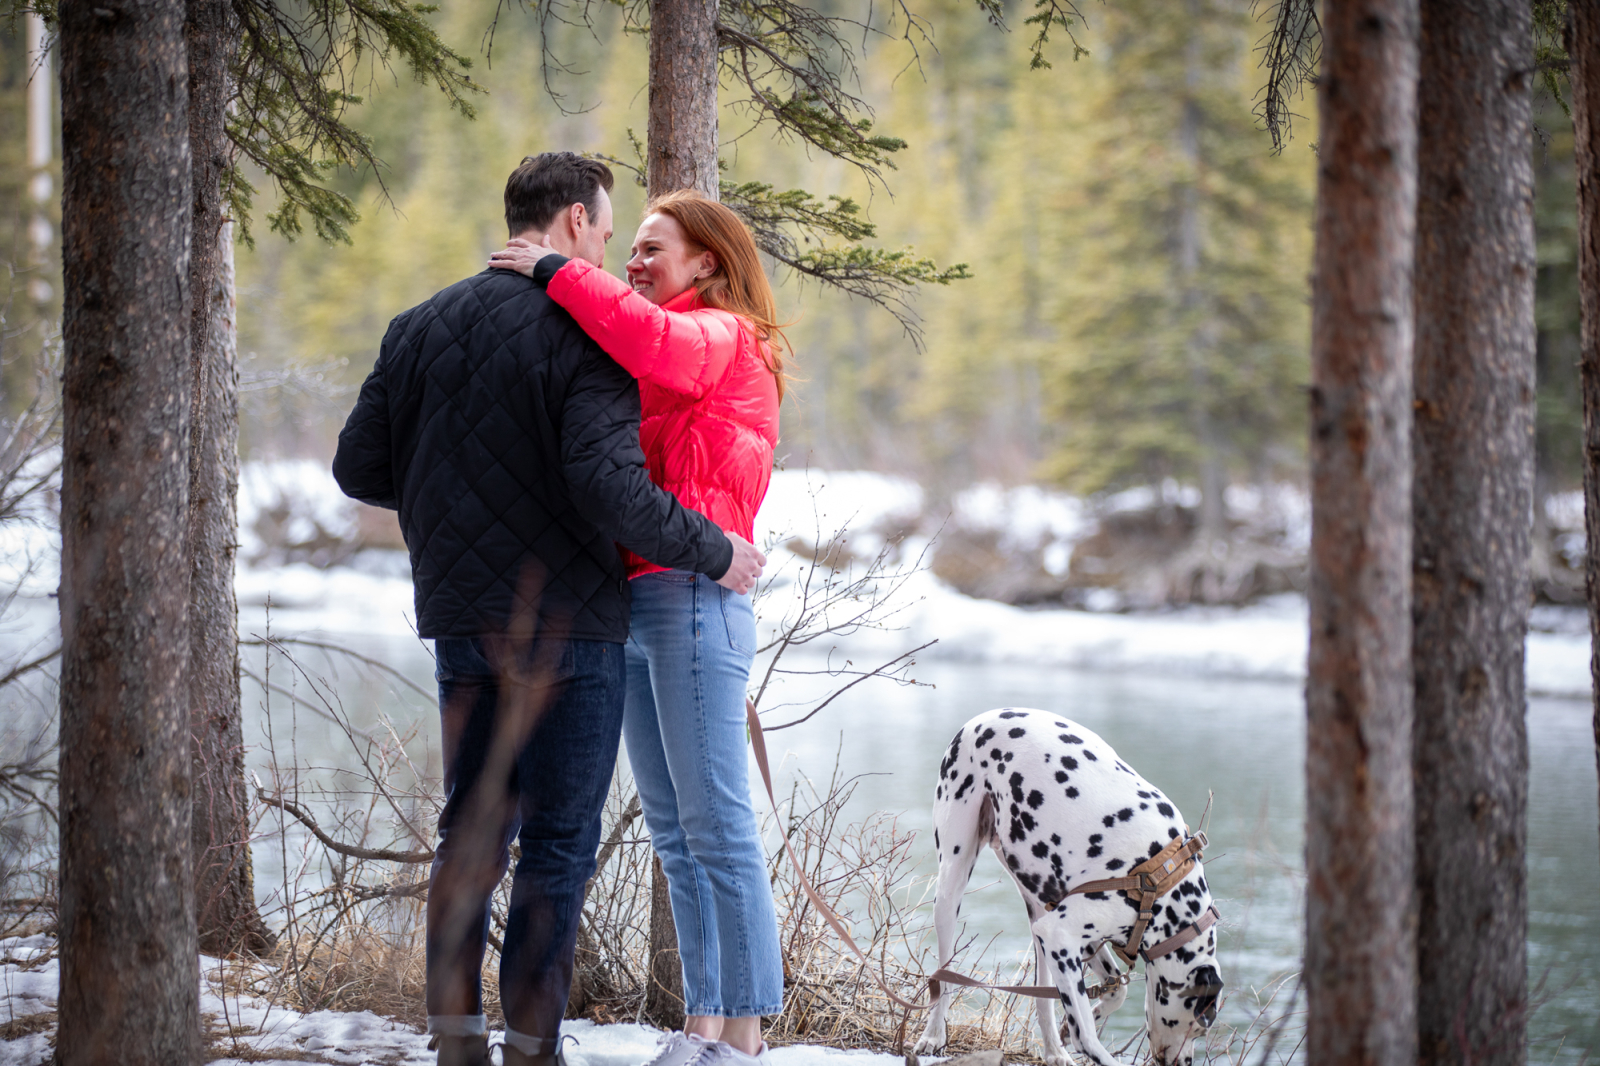 Canmore Engagement Photographers, Surprise proposal photographers  Eric Daigle Photography